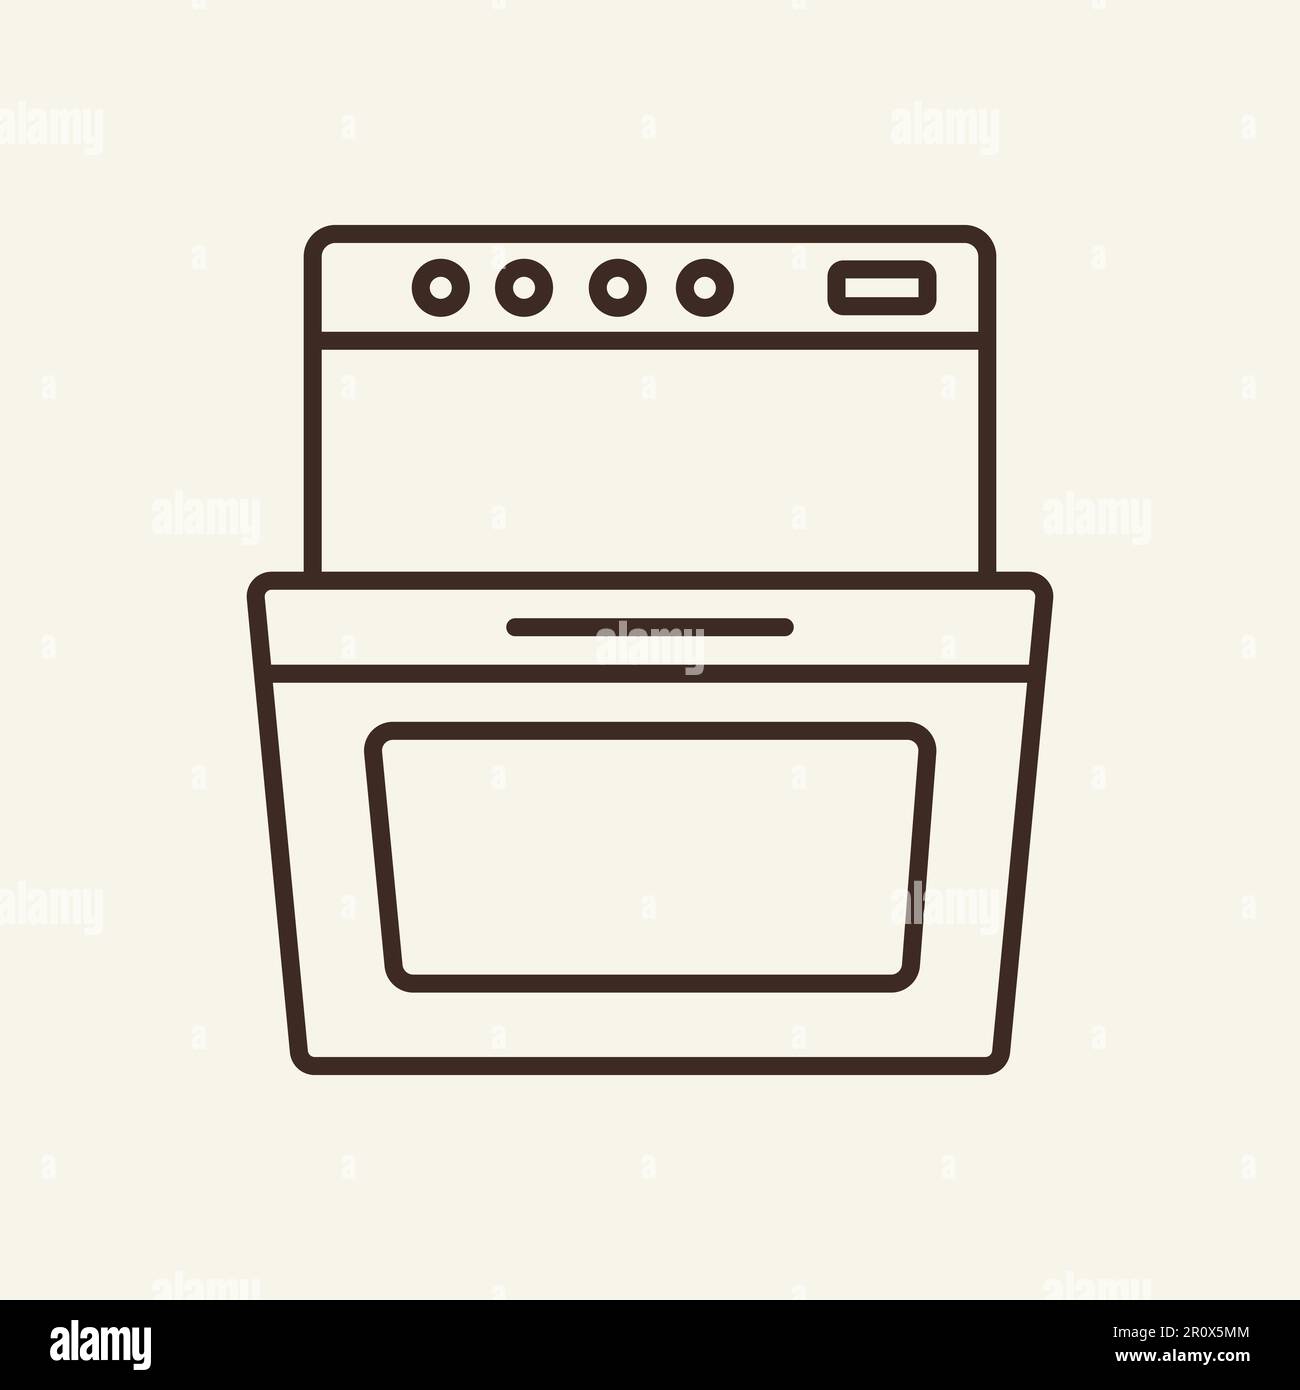 Electric cooker line icon Stock Vector